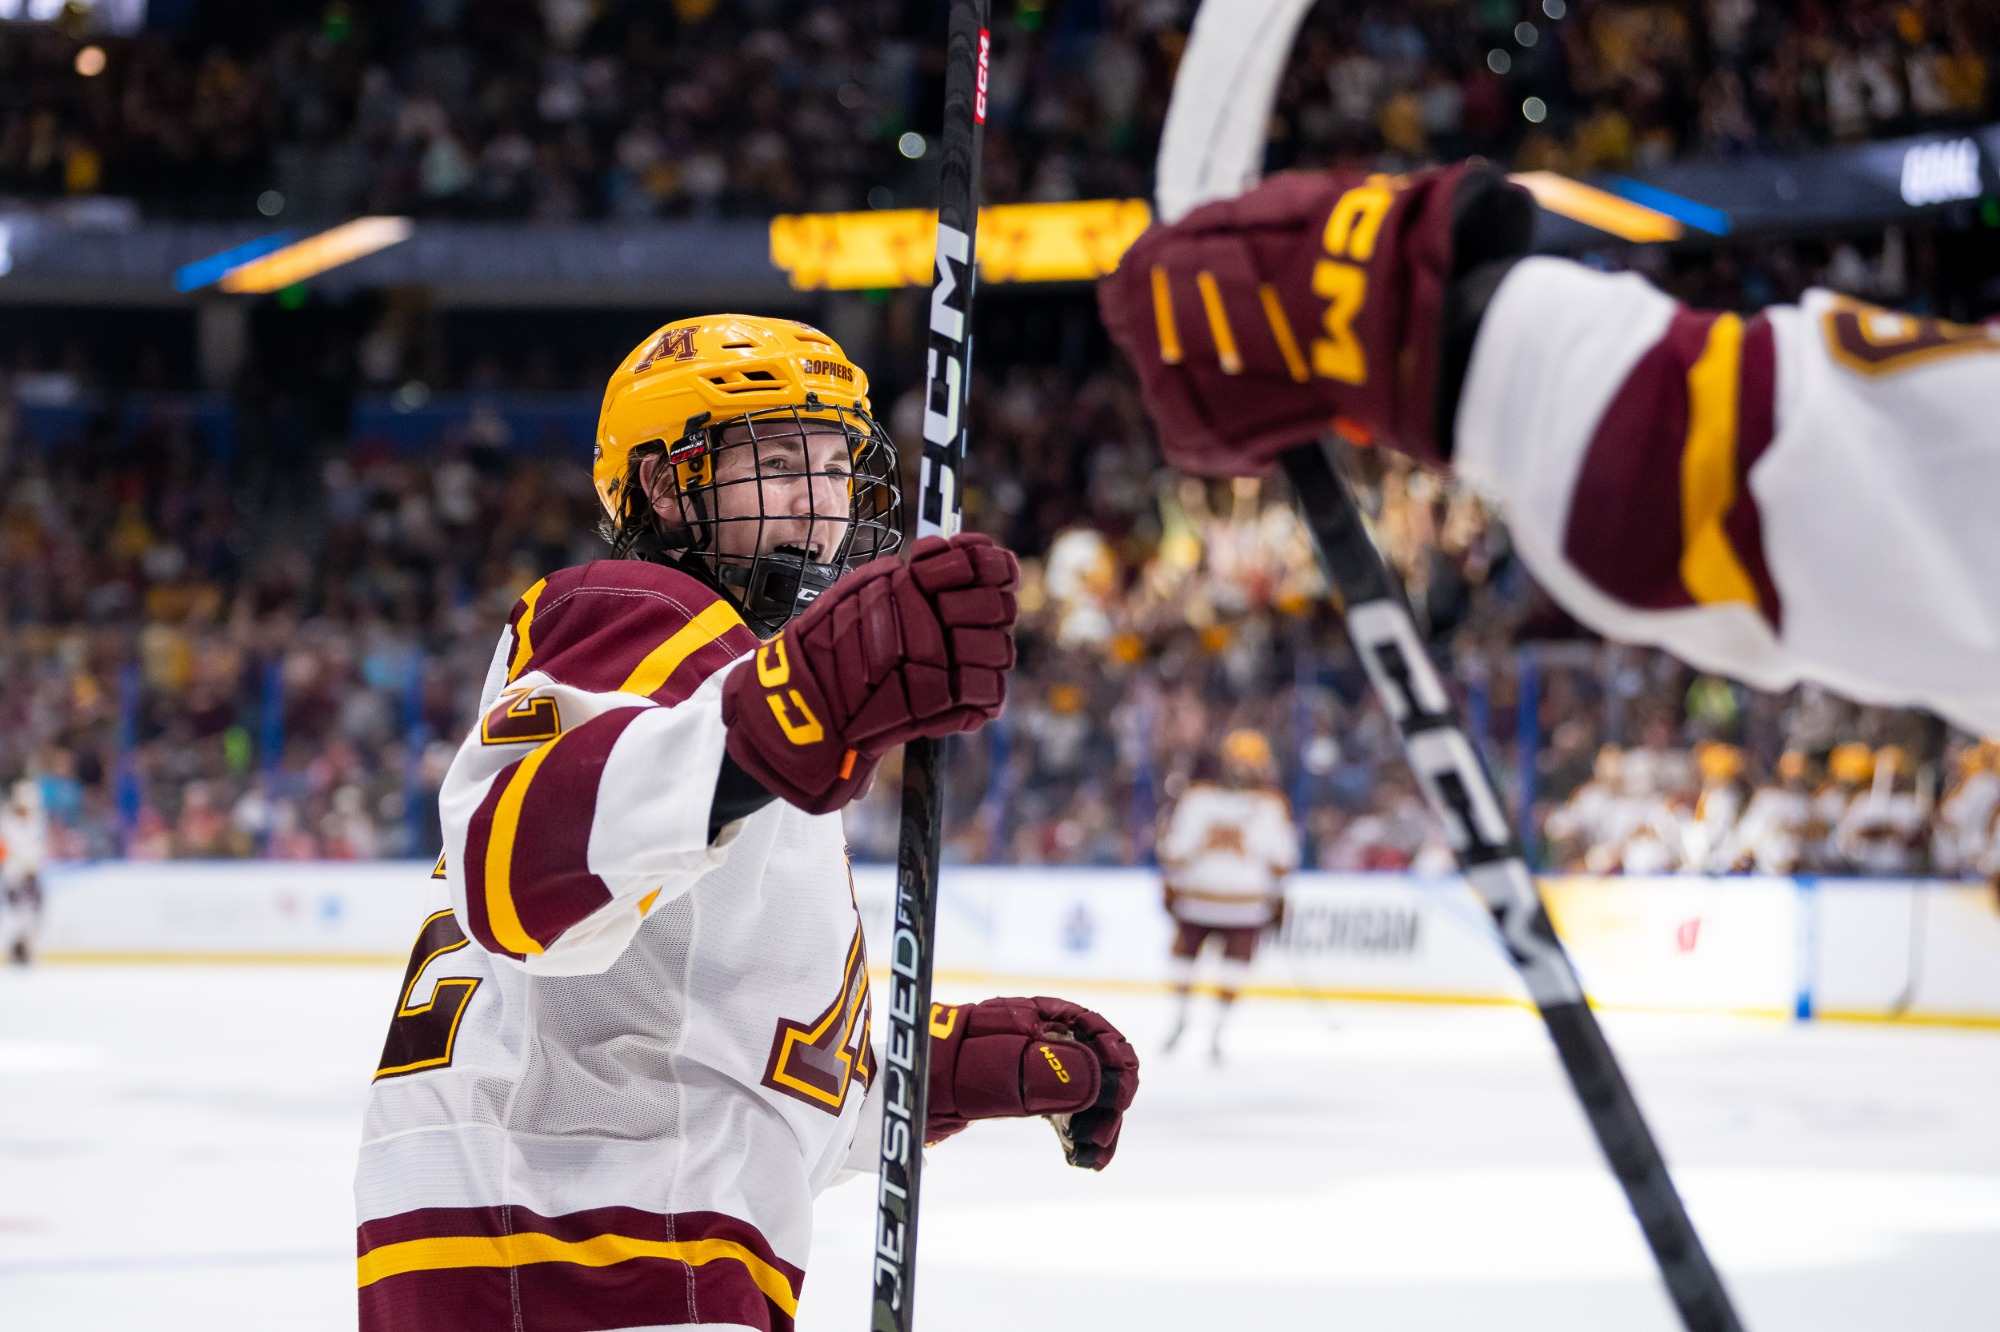 Top-ranked Gophers lose championship game in overtime